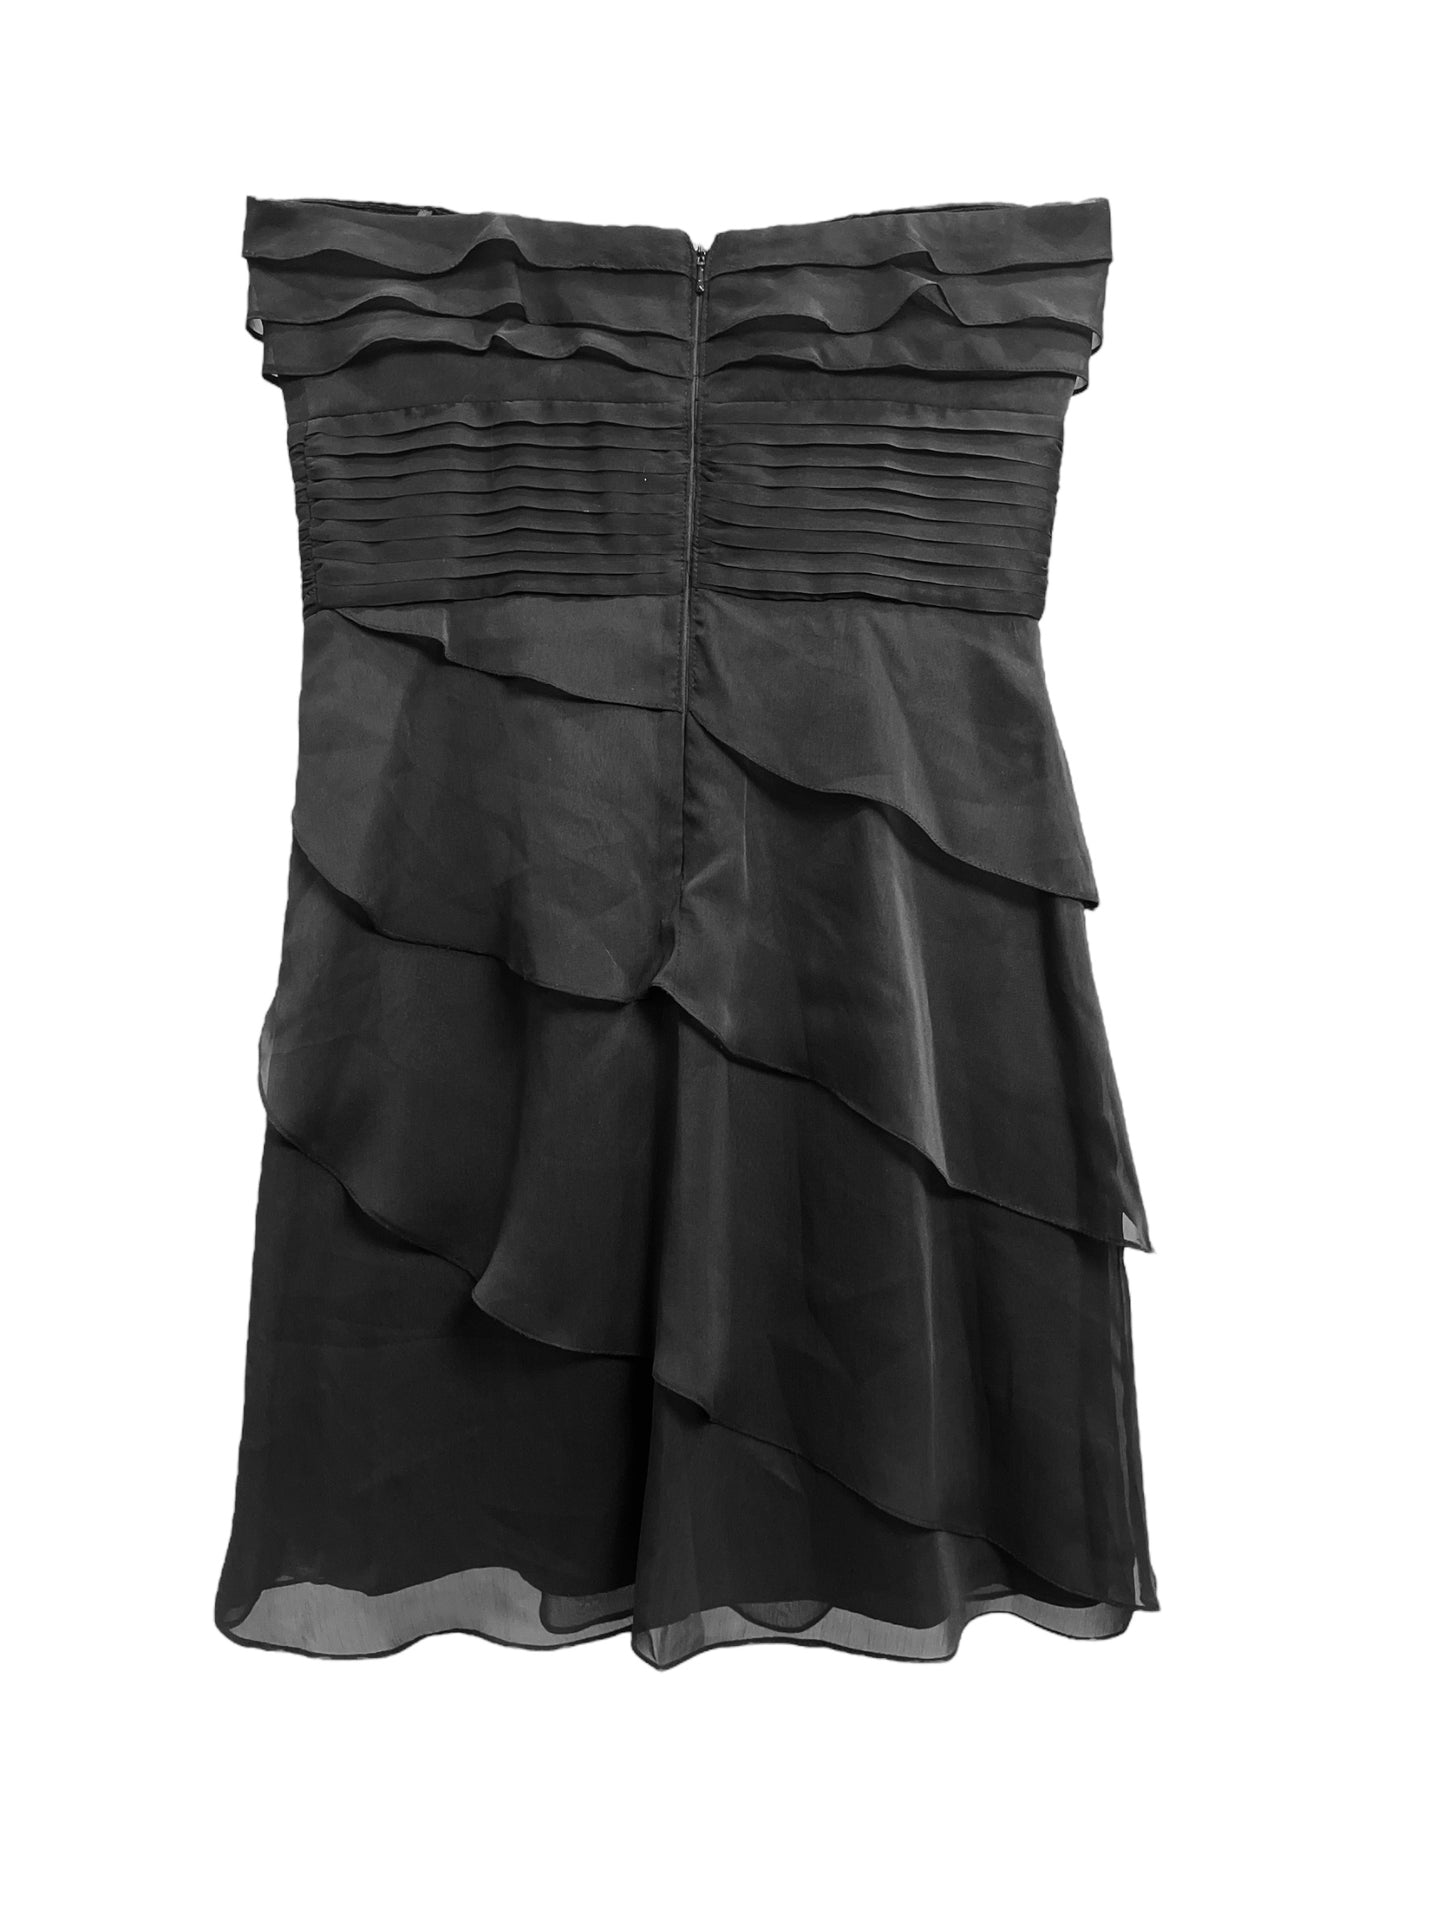 Adrianna Papell Evening Black Ruched Cocktail Dress Size 8 NWT - New with Tags